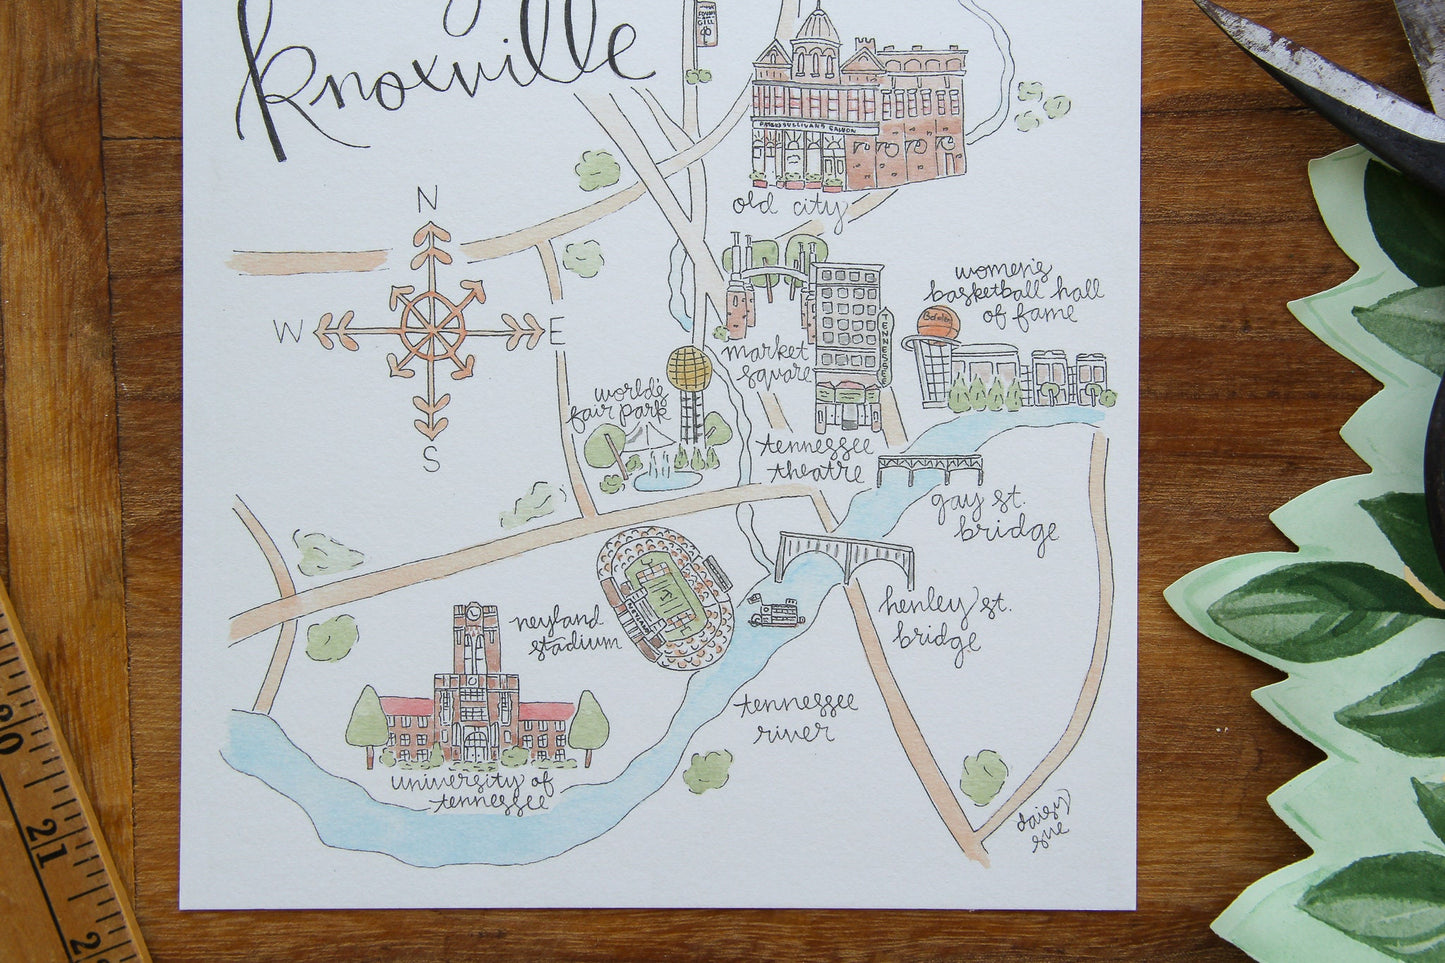 City of Knoxville, Tennessee Art Print